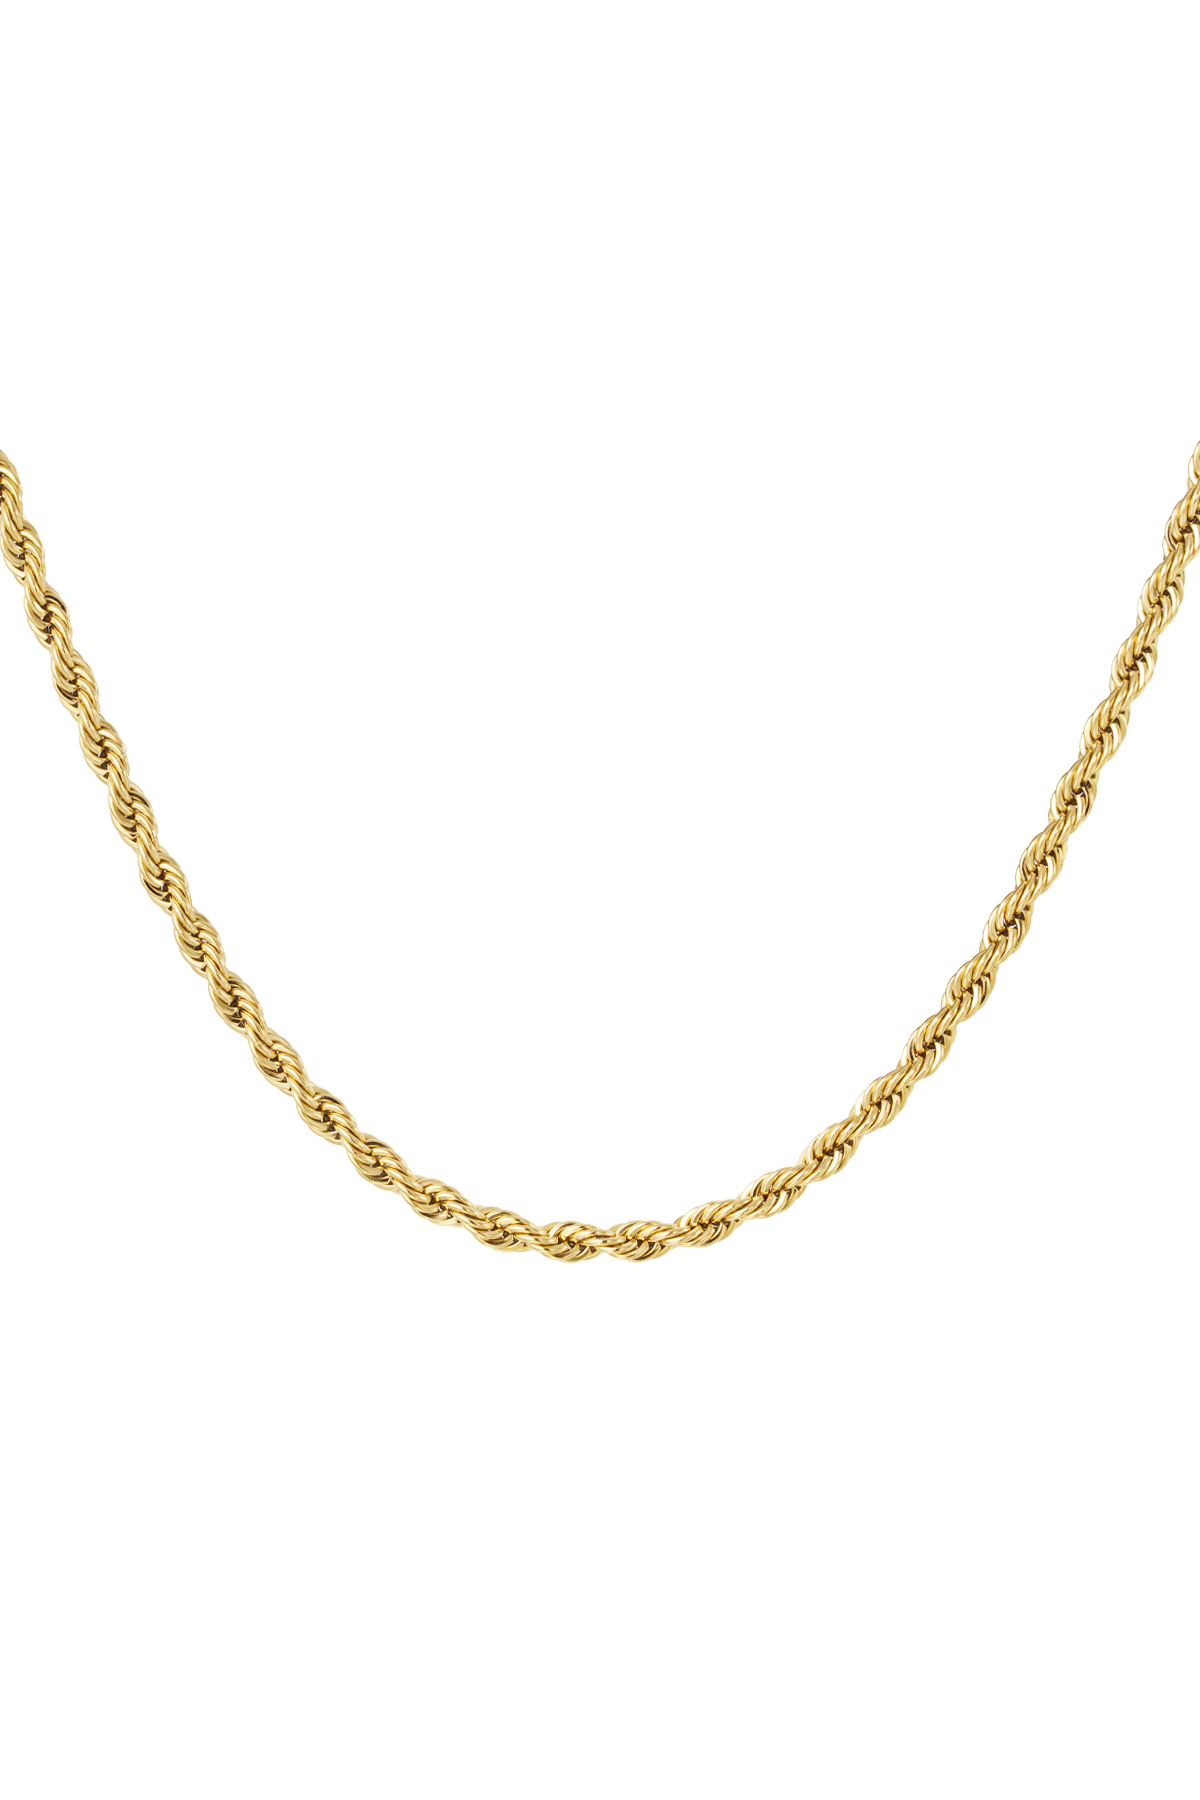 Unisex necklace twisted - gold - 4.5MM 